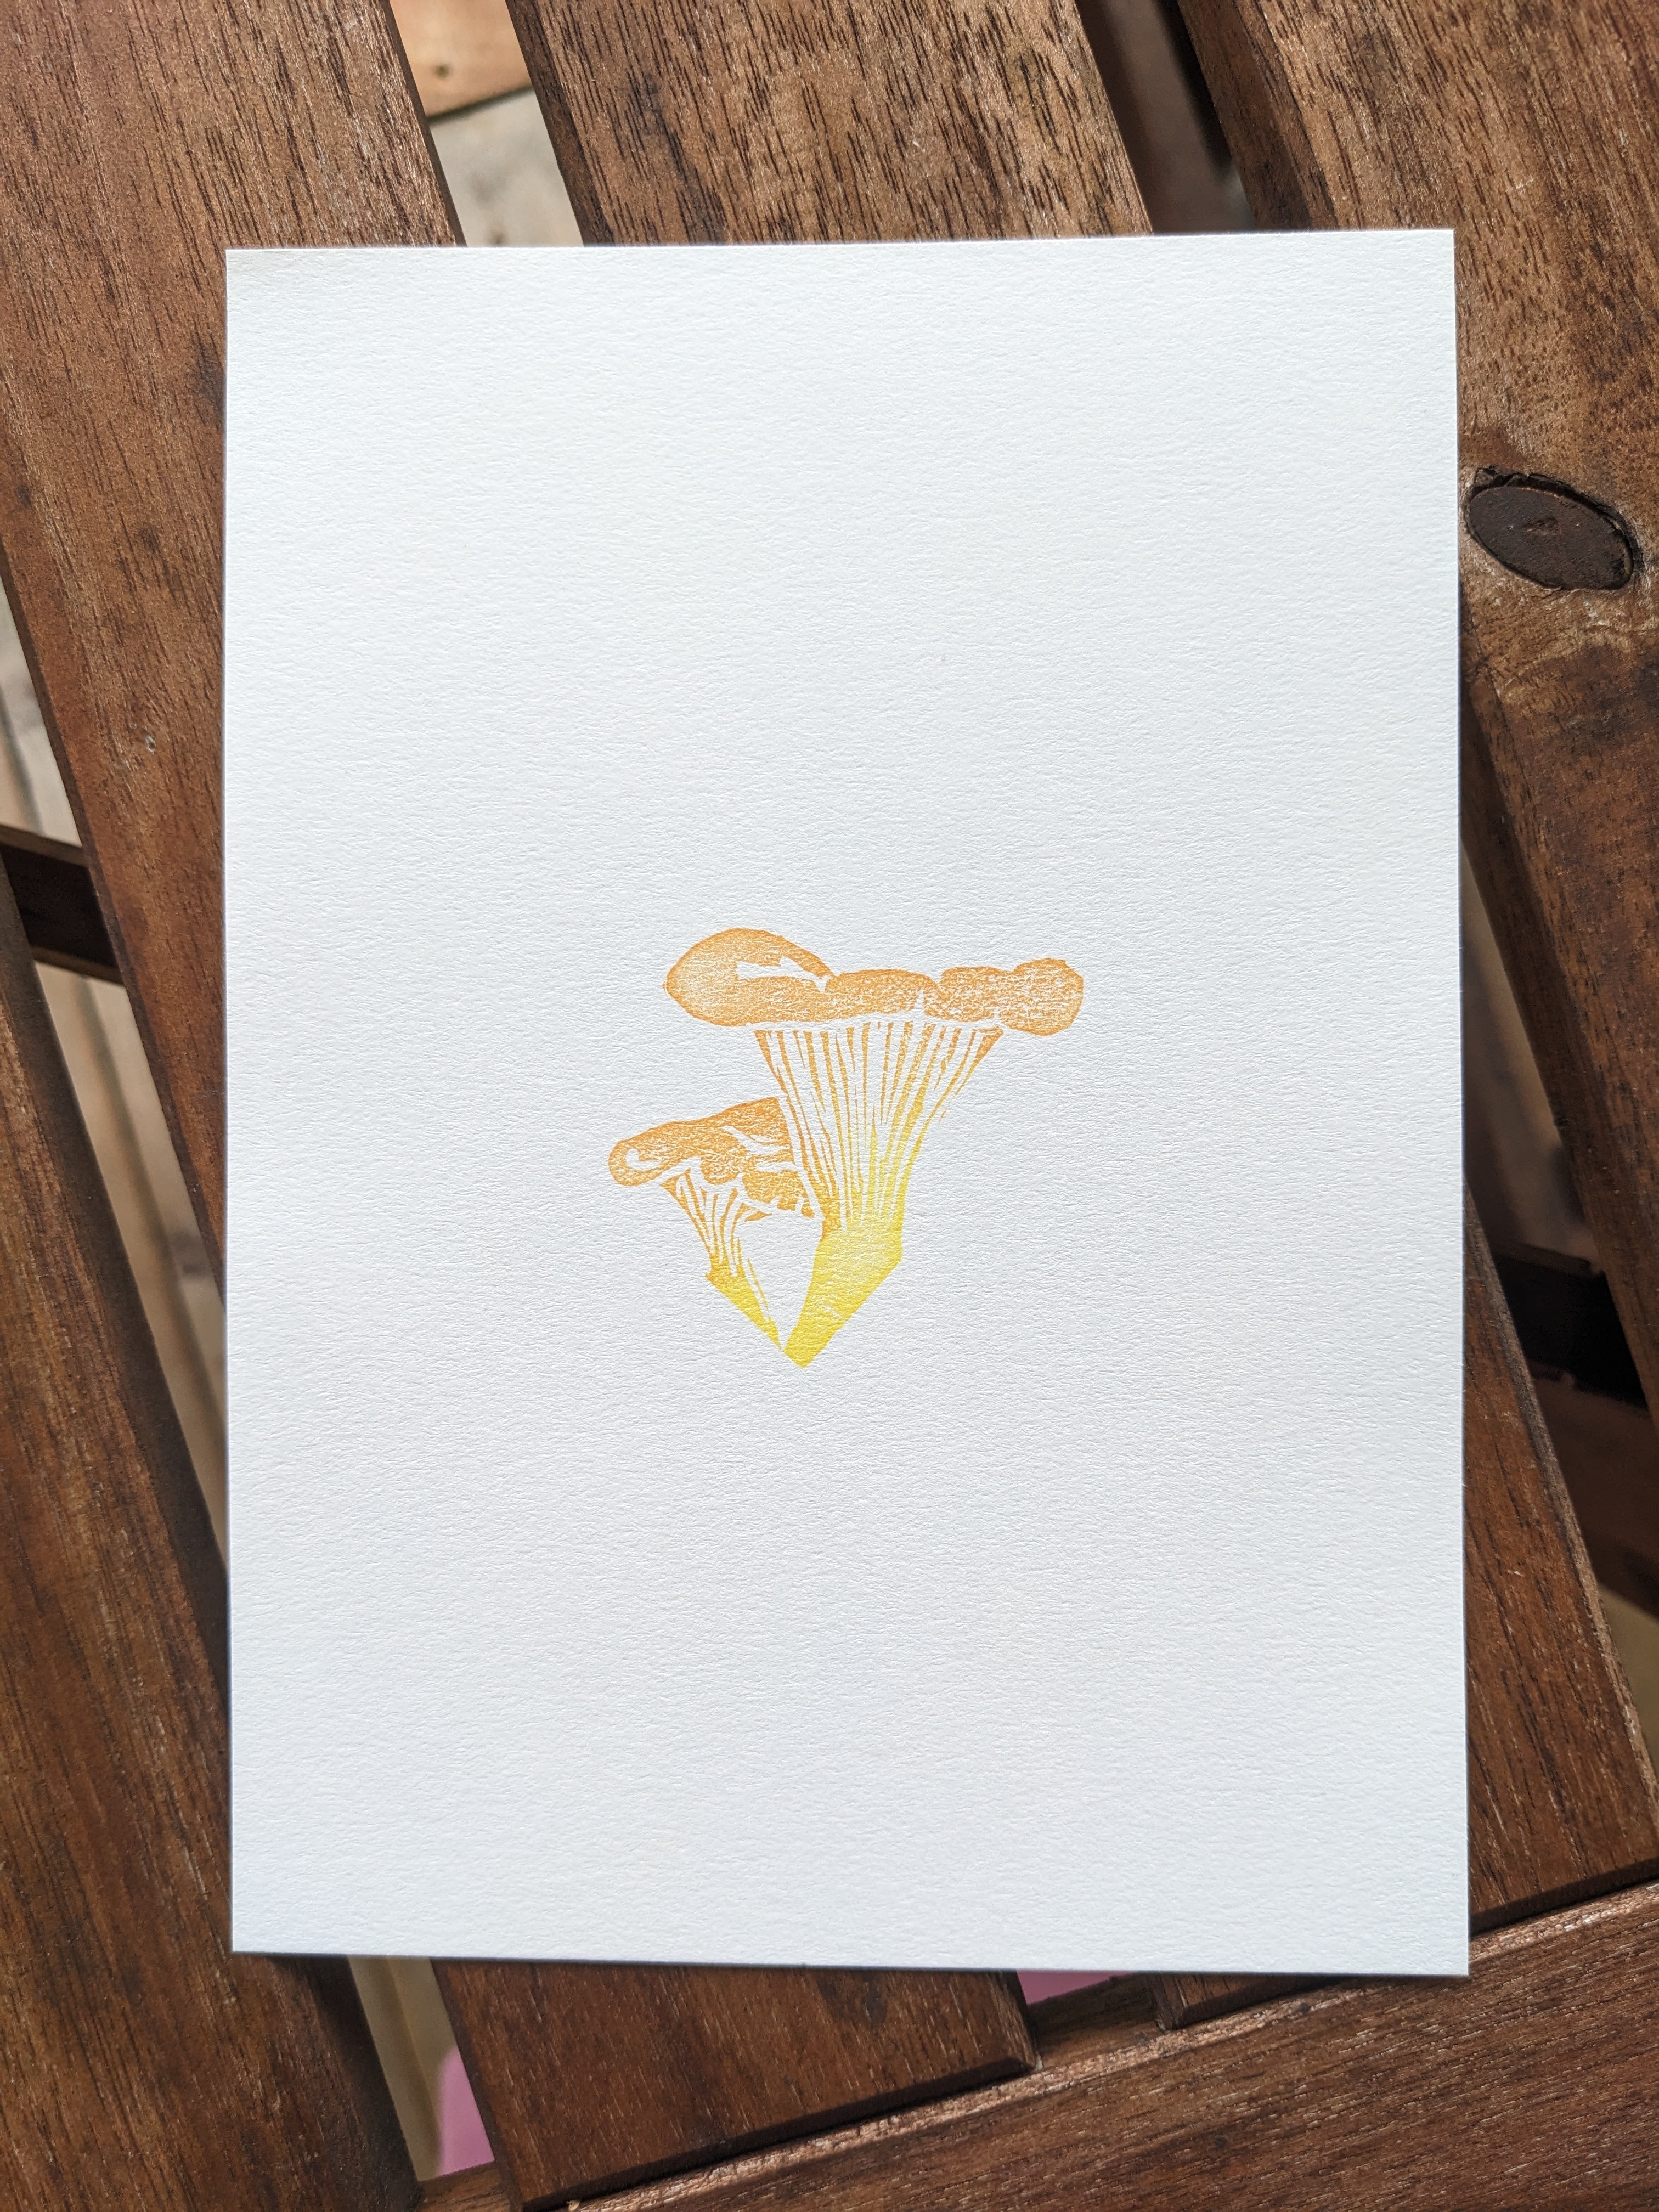 A print of two chanterelle mushrooms inked in a dark-to-light yellow gradient.